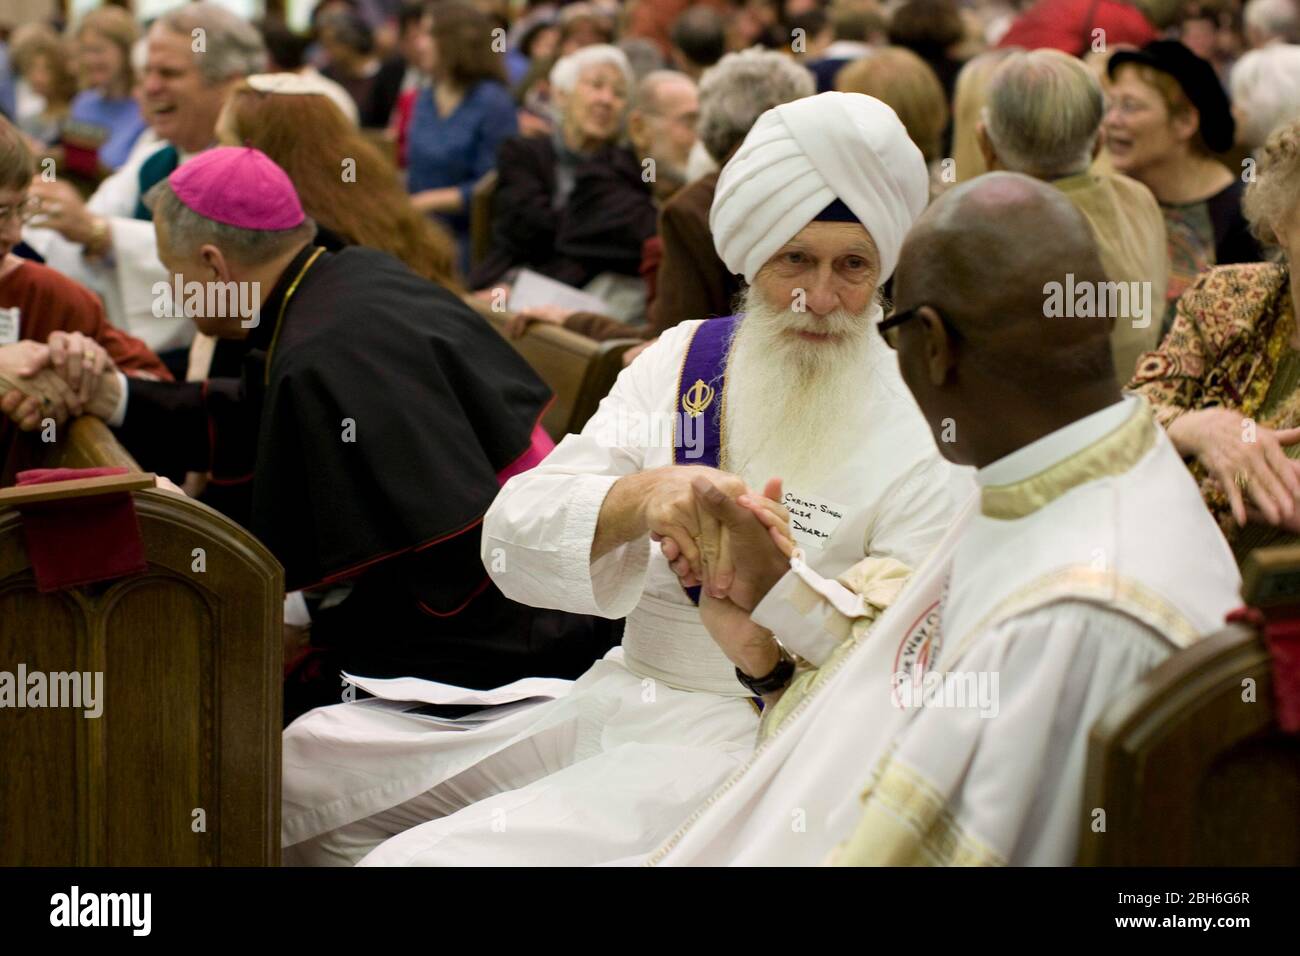 Austin, Texas: November 23, 2008. Austin Area Interreligious Ministries' (AAIM) 24th annual Interfaith Thanksgiving celebration of diversity  showing a Sikh priest shaking hands with a Baptist minister at the service.  ©Bob Daemmrich Stock Photo